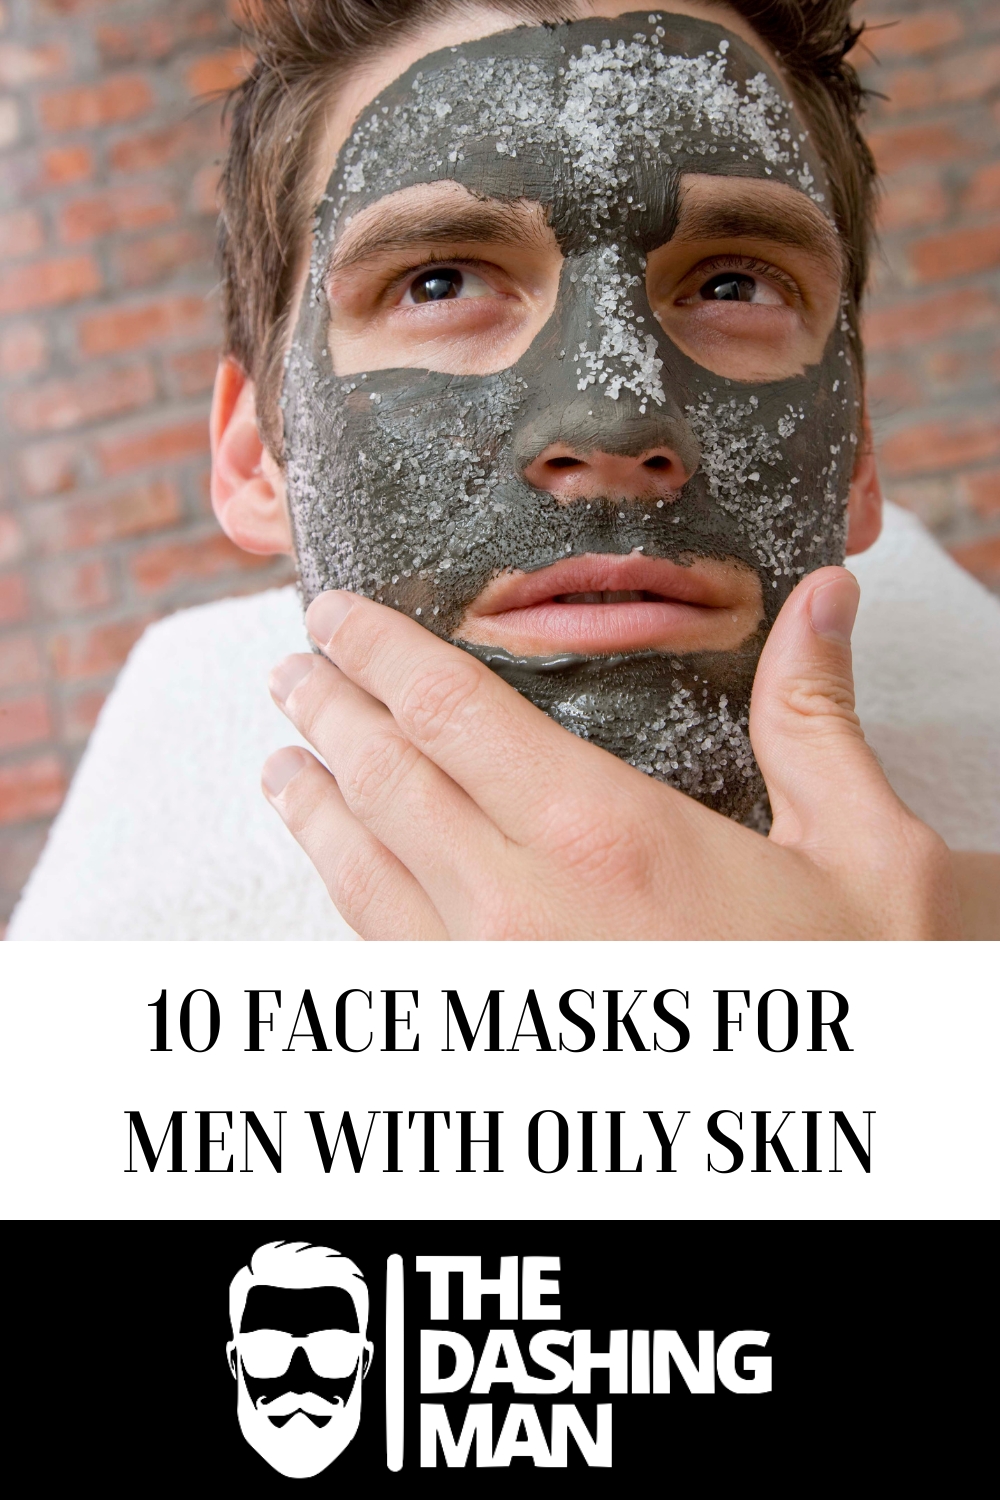 10 Face Masks for Men with Oily Skin